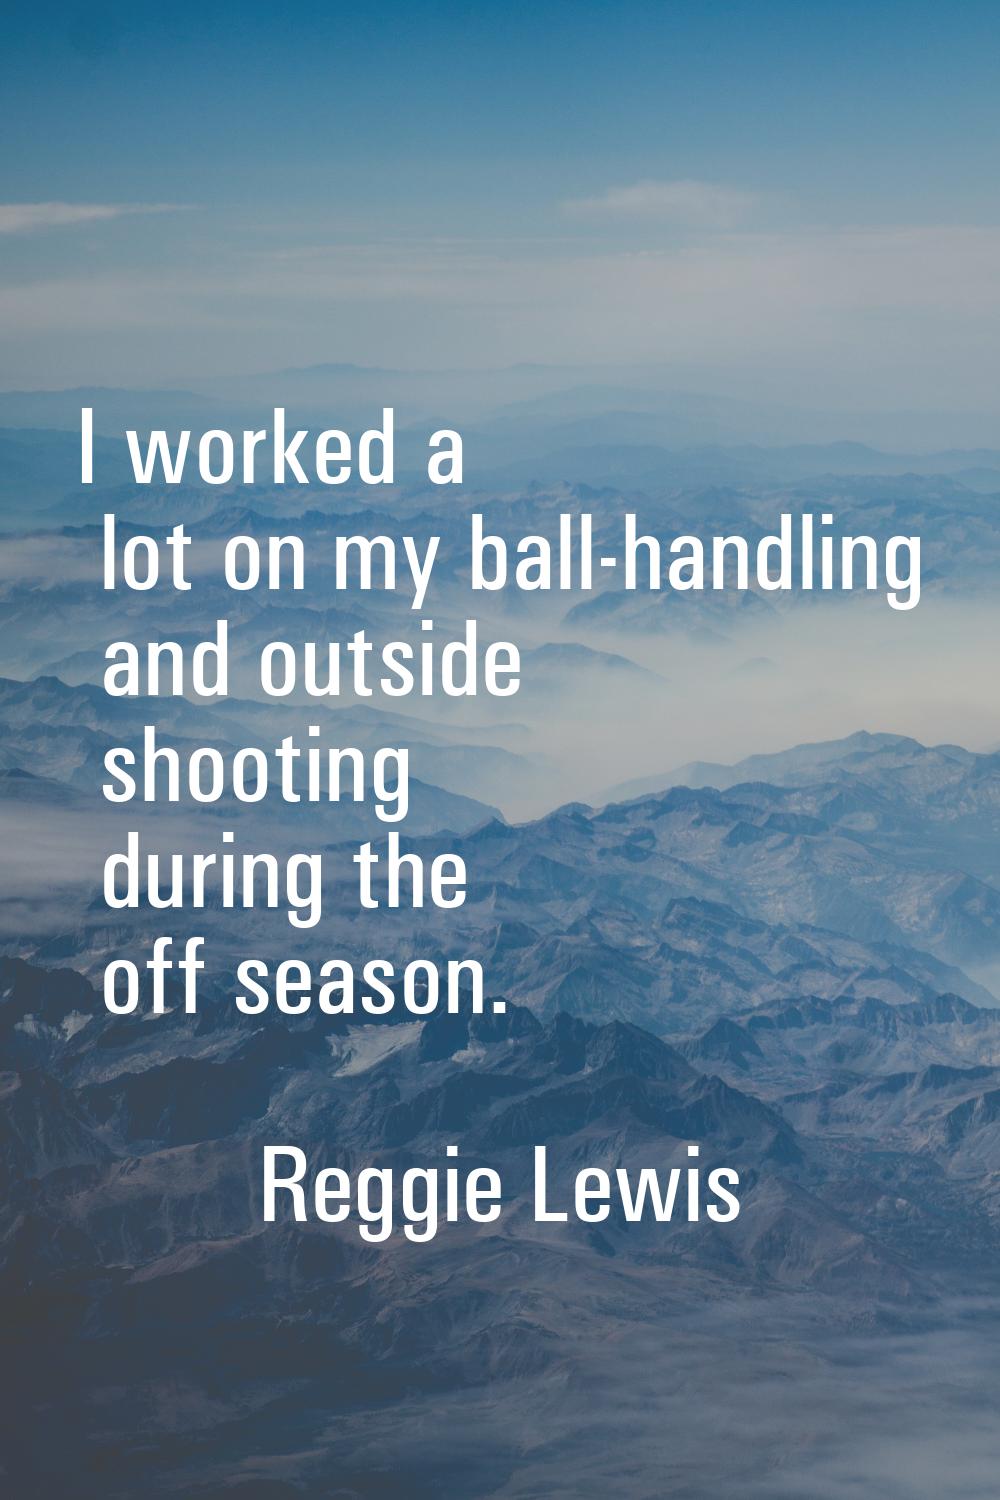 I worked a lot on my ball-handling and outside shooting during the off season.